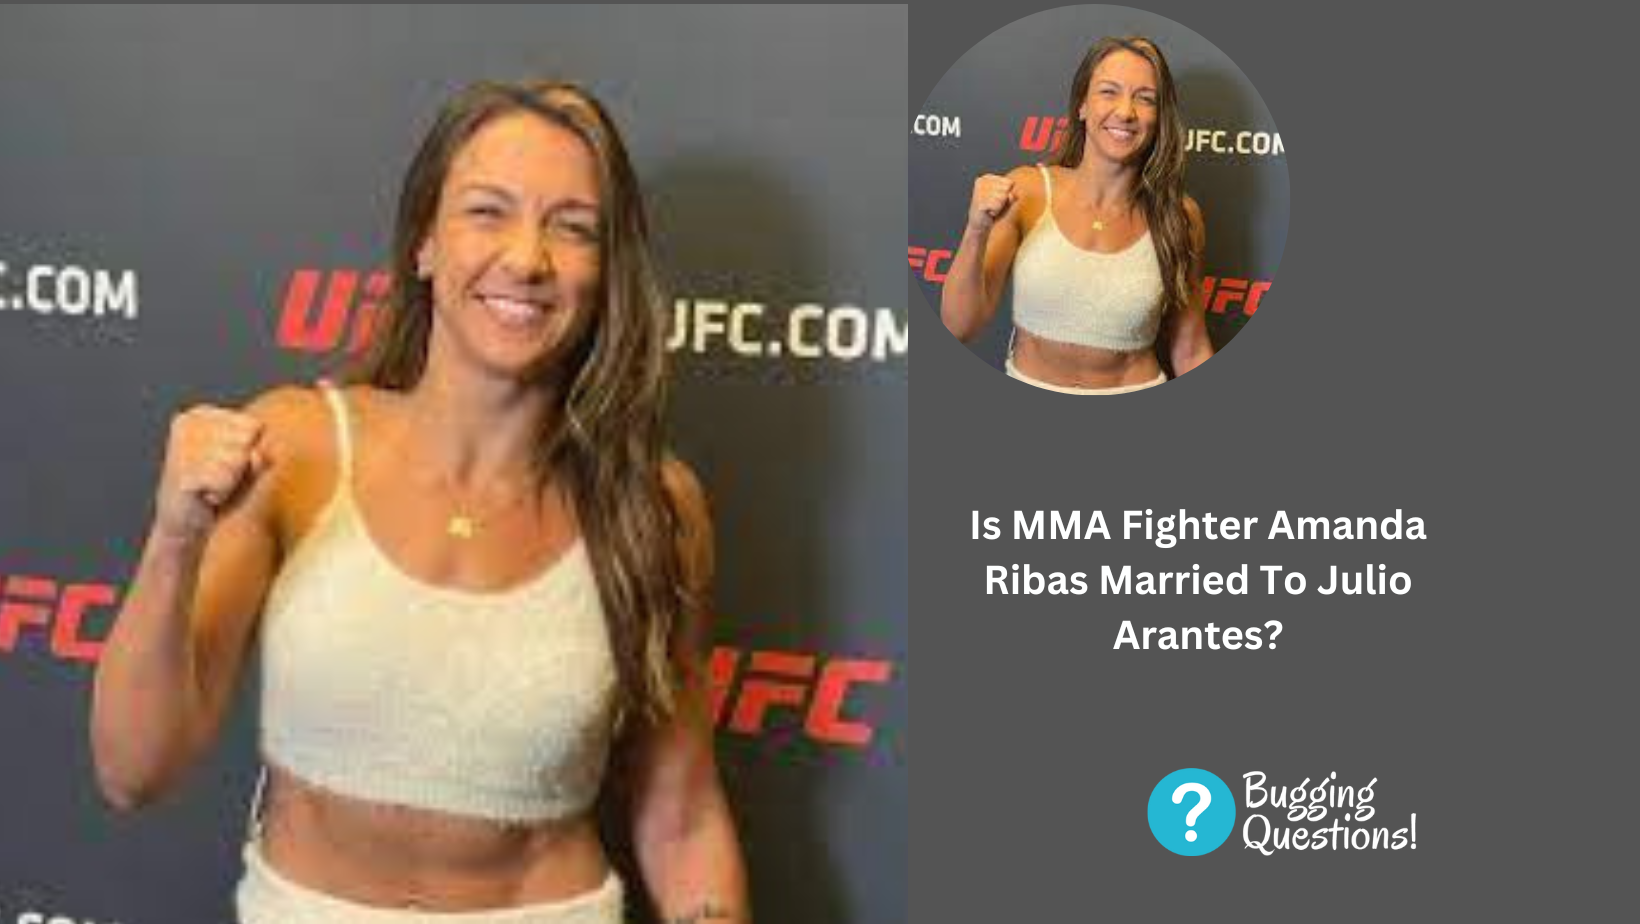 Is MMA Fighter Amanda Ribas Married To Julio Arantes?